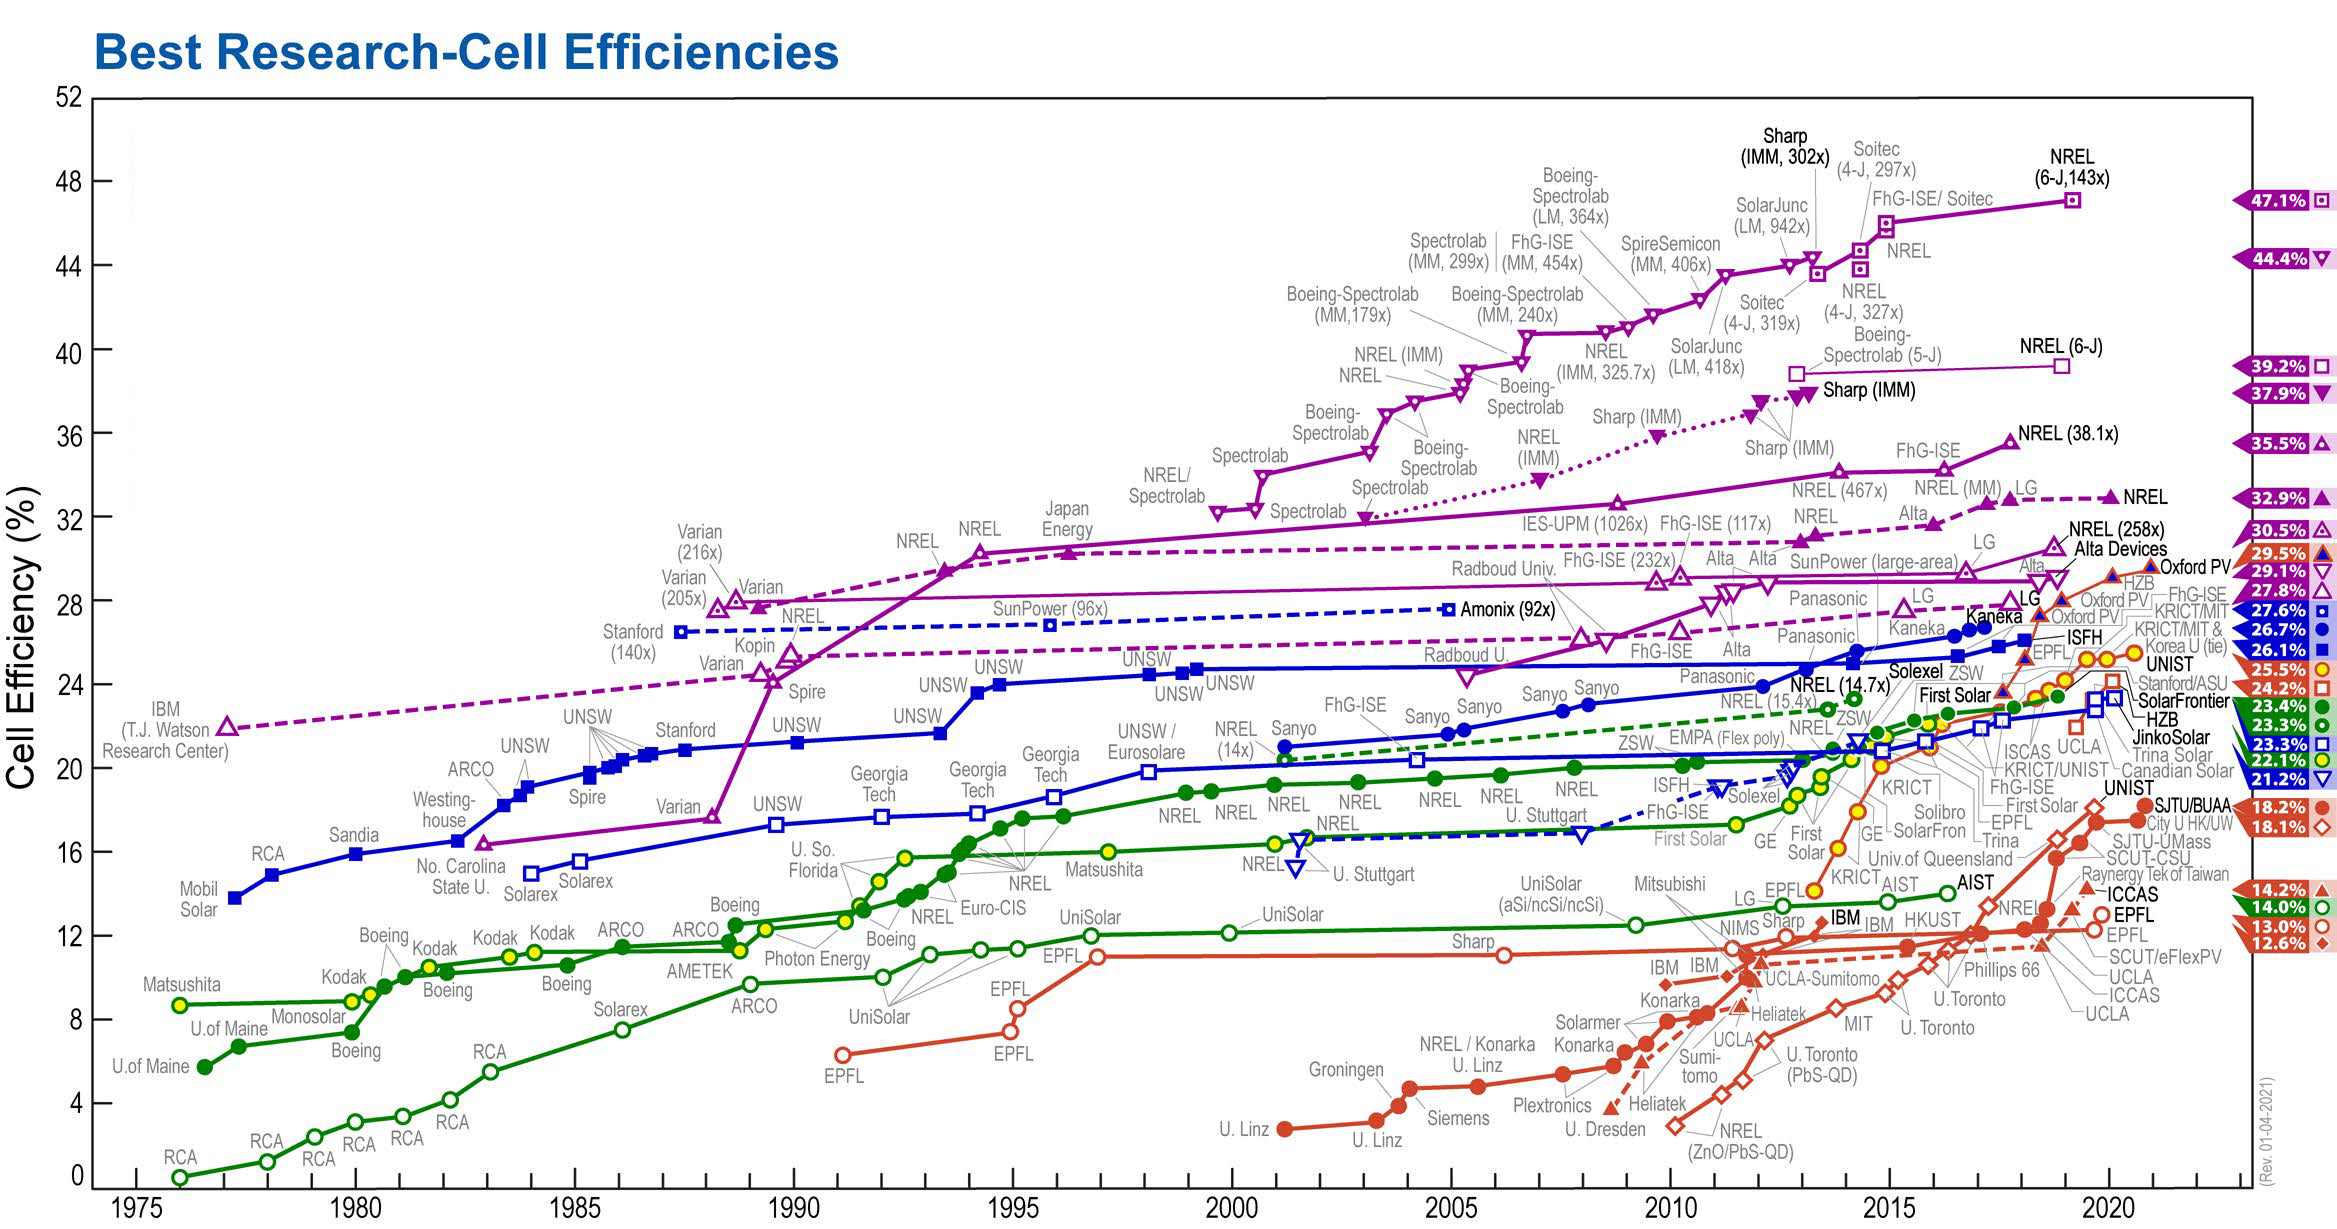 Cell efficiency growth for all cell types from 1976-2019. compiled. National Renewable Energy Laboratory (NREL) graph, CC0 license, source: [https://pl.wikipedia.org/wiki/Plik:Best_Research-Cell_Efficiencies.png#file|Wikipedia].